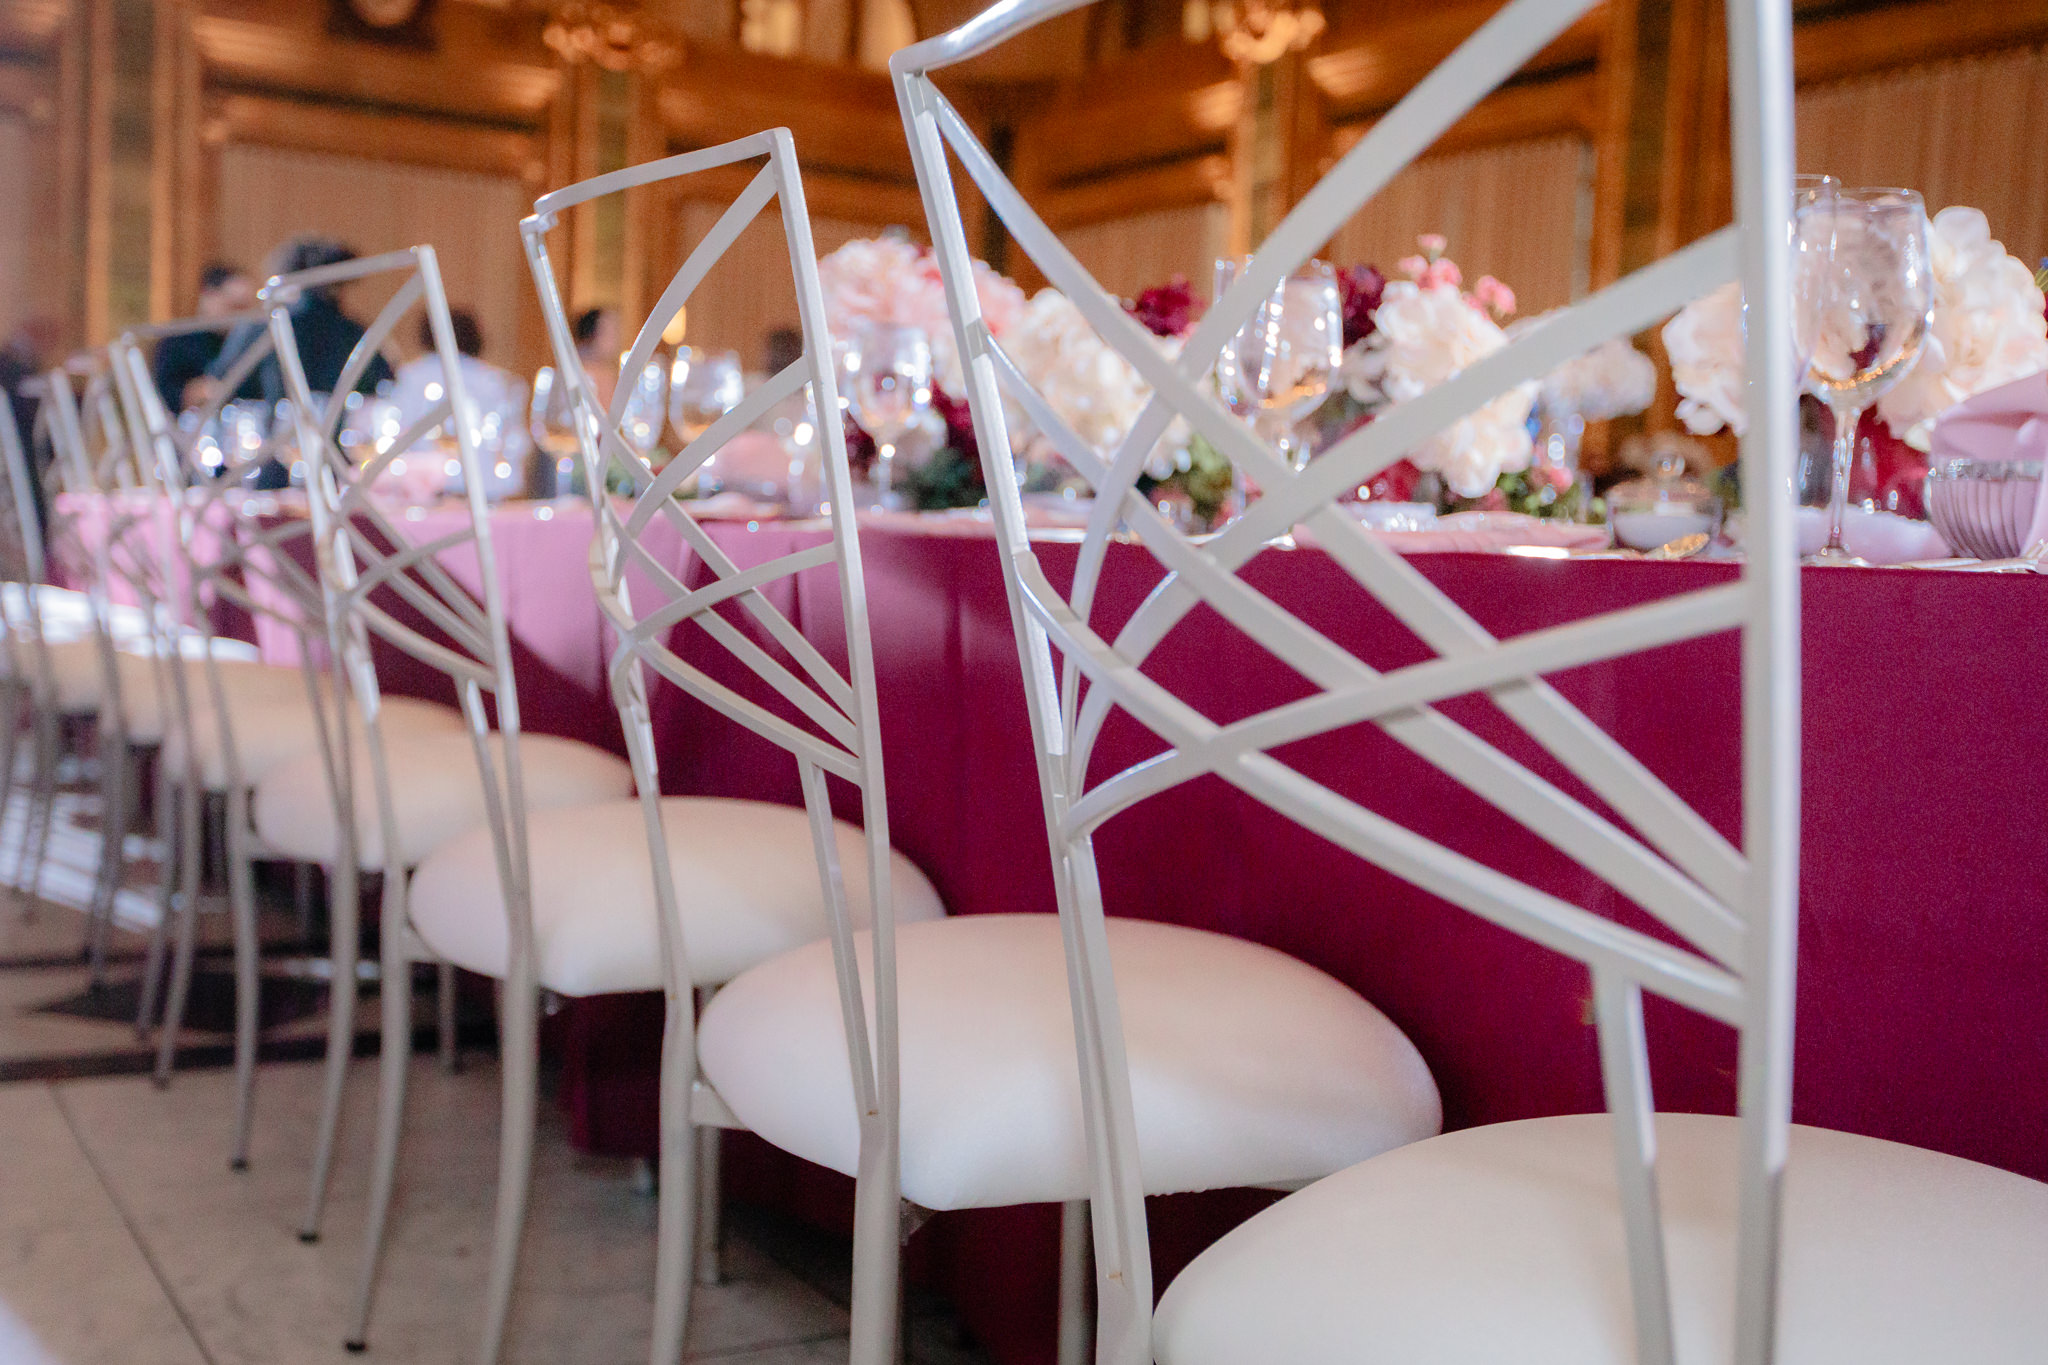 White chairs lined the wedding party's head table at The Pennsylvanian